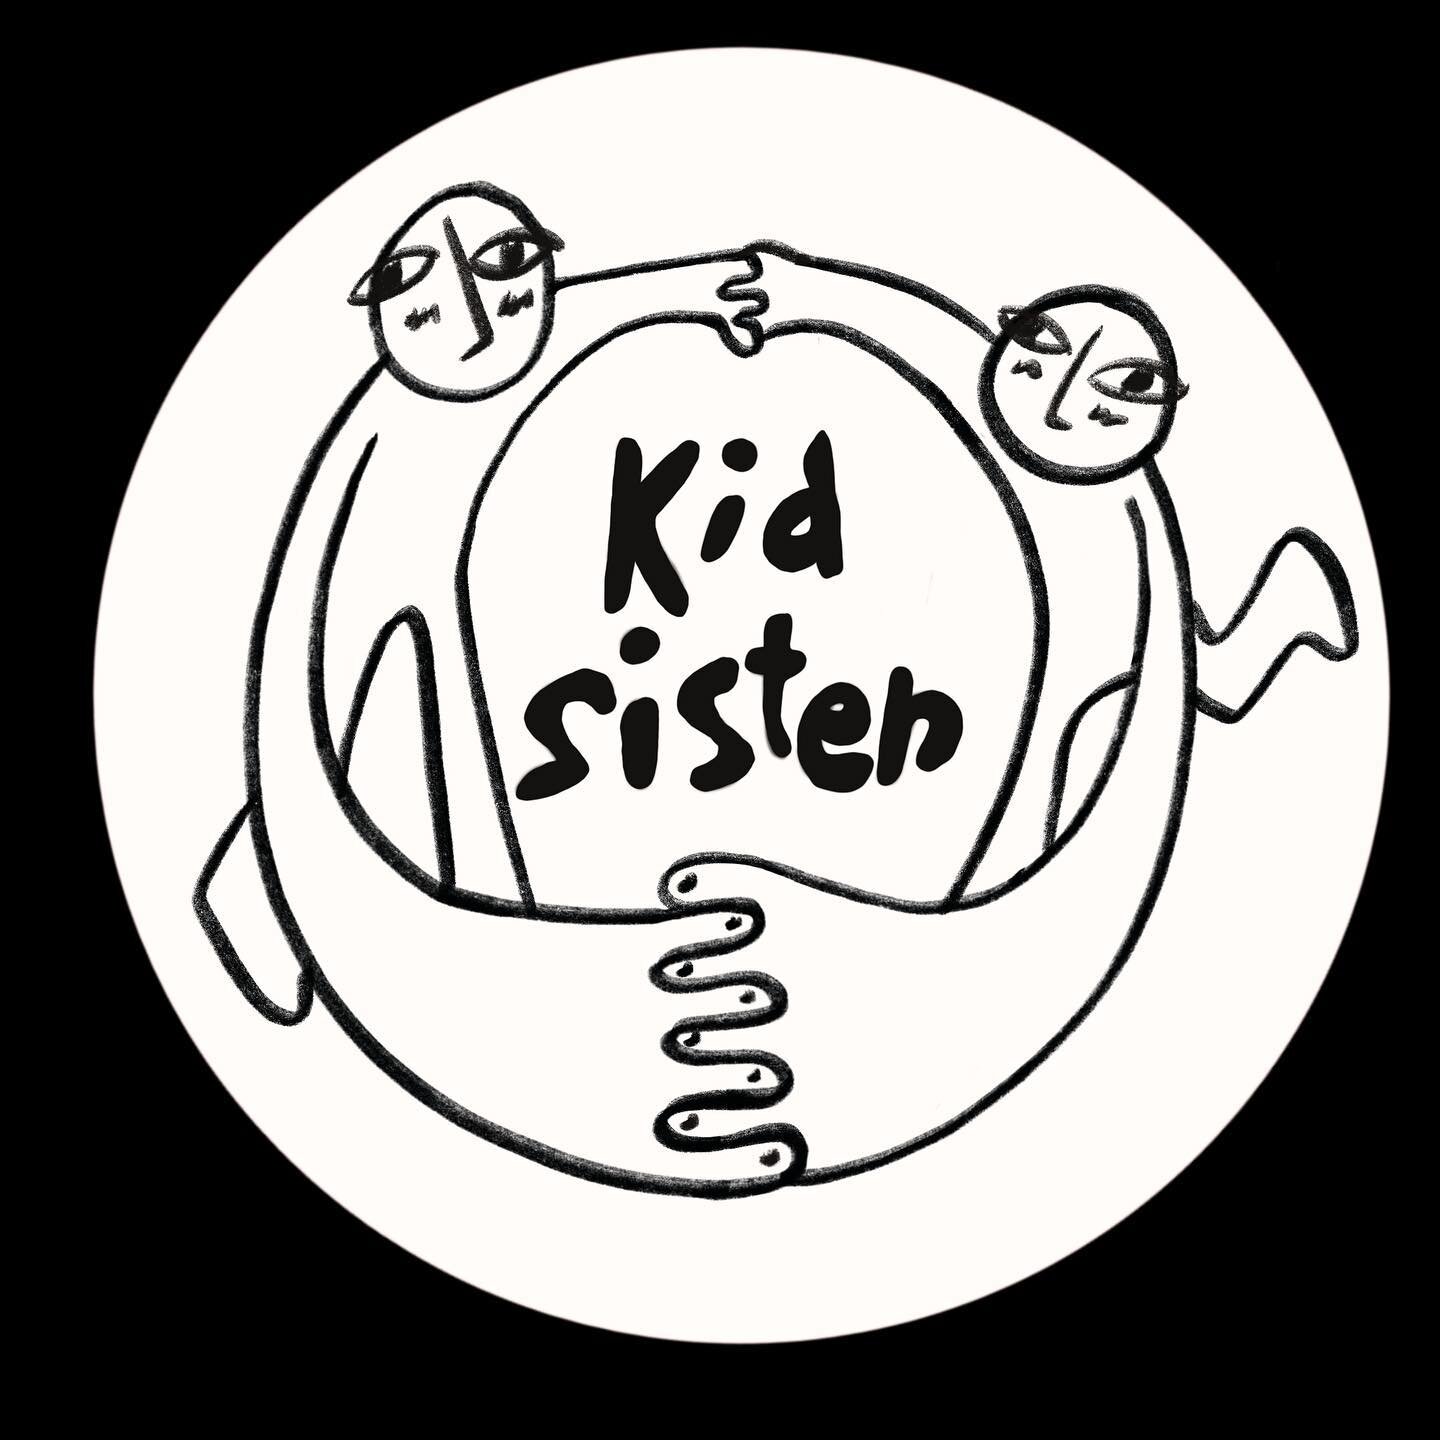 Introducing&hellip;the KID SISTER LOGO!!!! We are so fortunate to have collaborated with @makenachatlin to make an image that captures our creative intentions as a company. THANK YOU MAKENA!!!! Cheers!